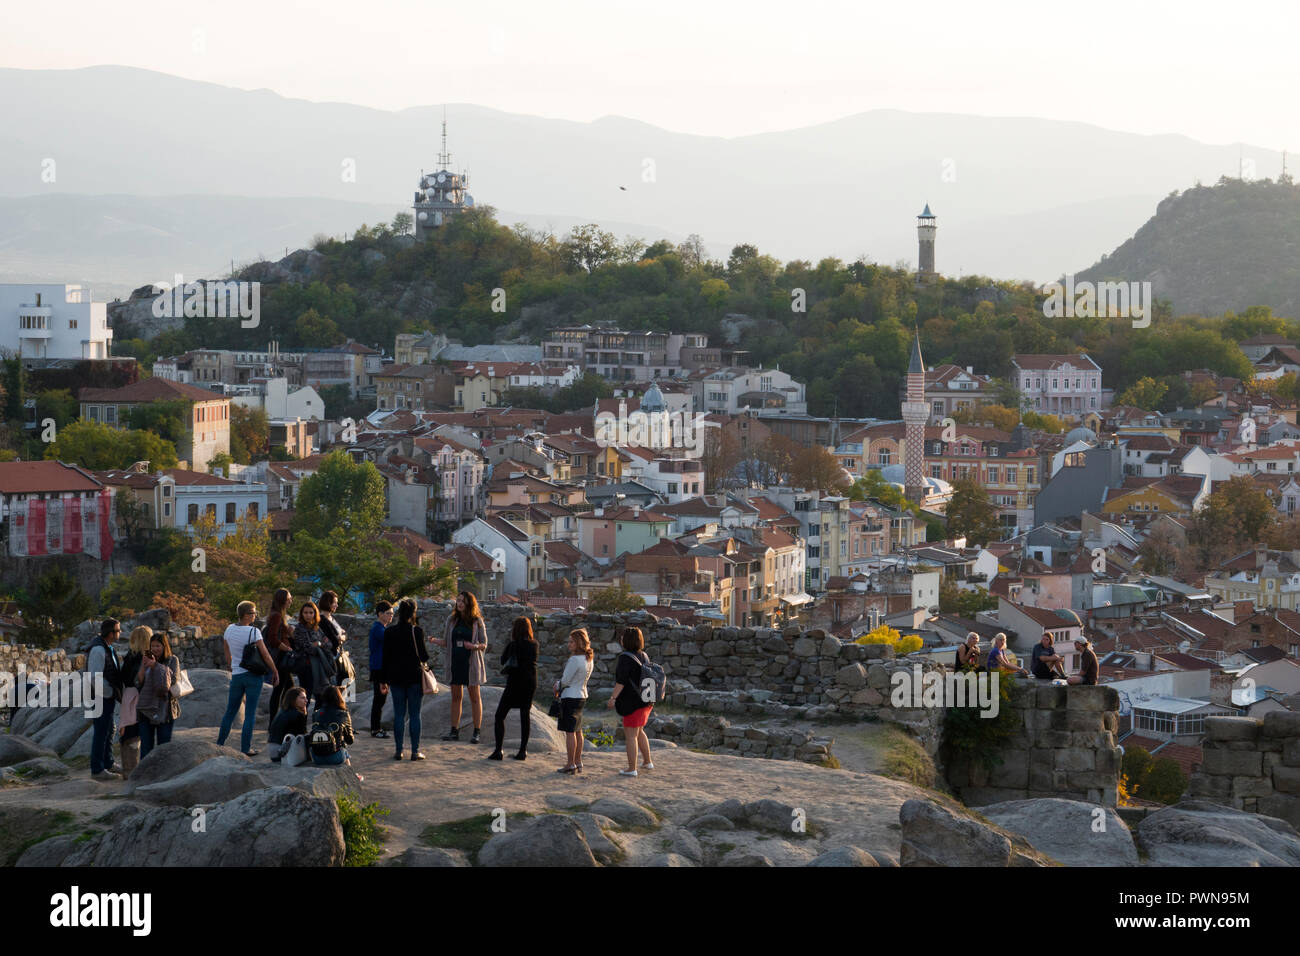 Guided group of tourists on scenic lookout over old town Plovdiv, Bulgaria Stock Photo